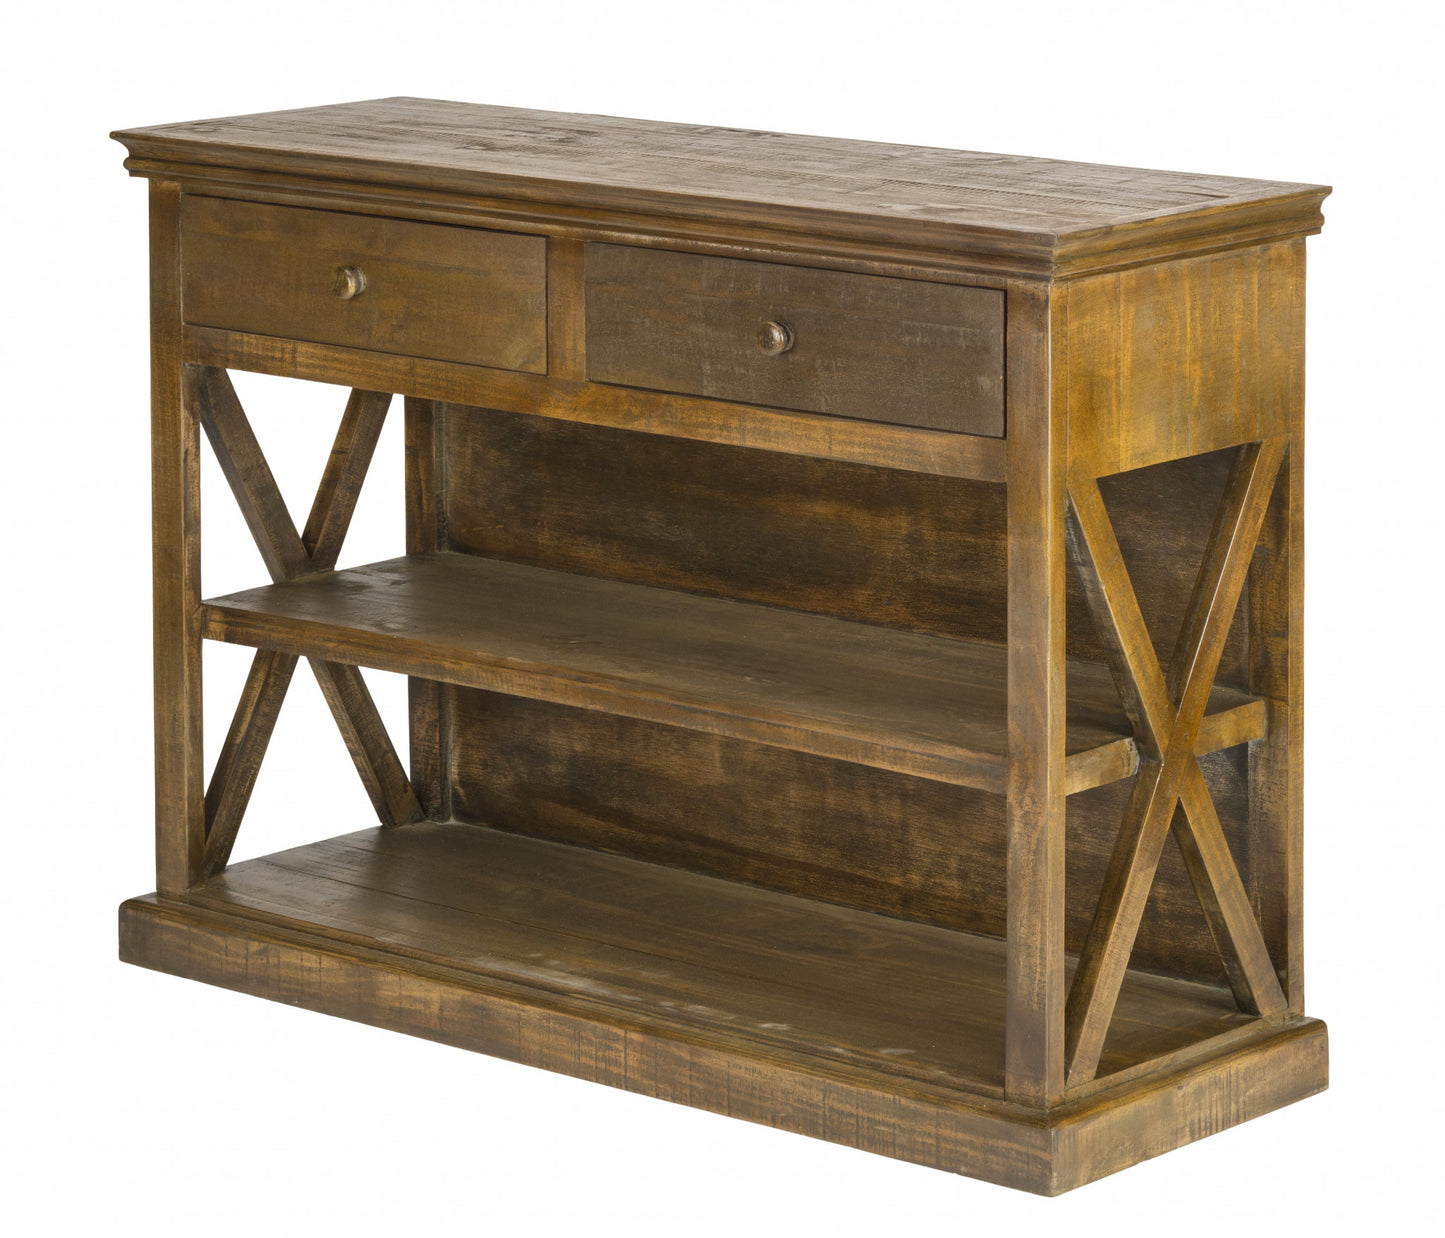 Rustic Maple Stain Wood Sofa Table with Drawers By Homeroots